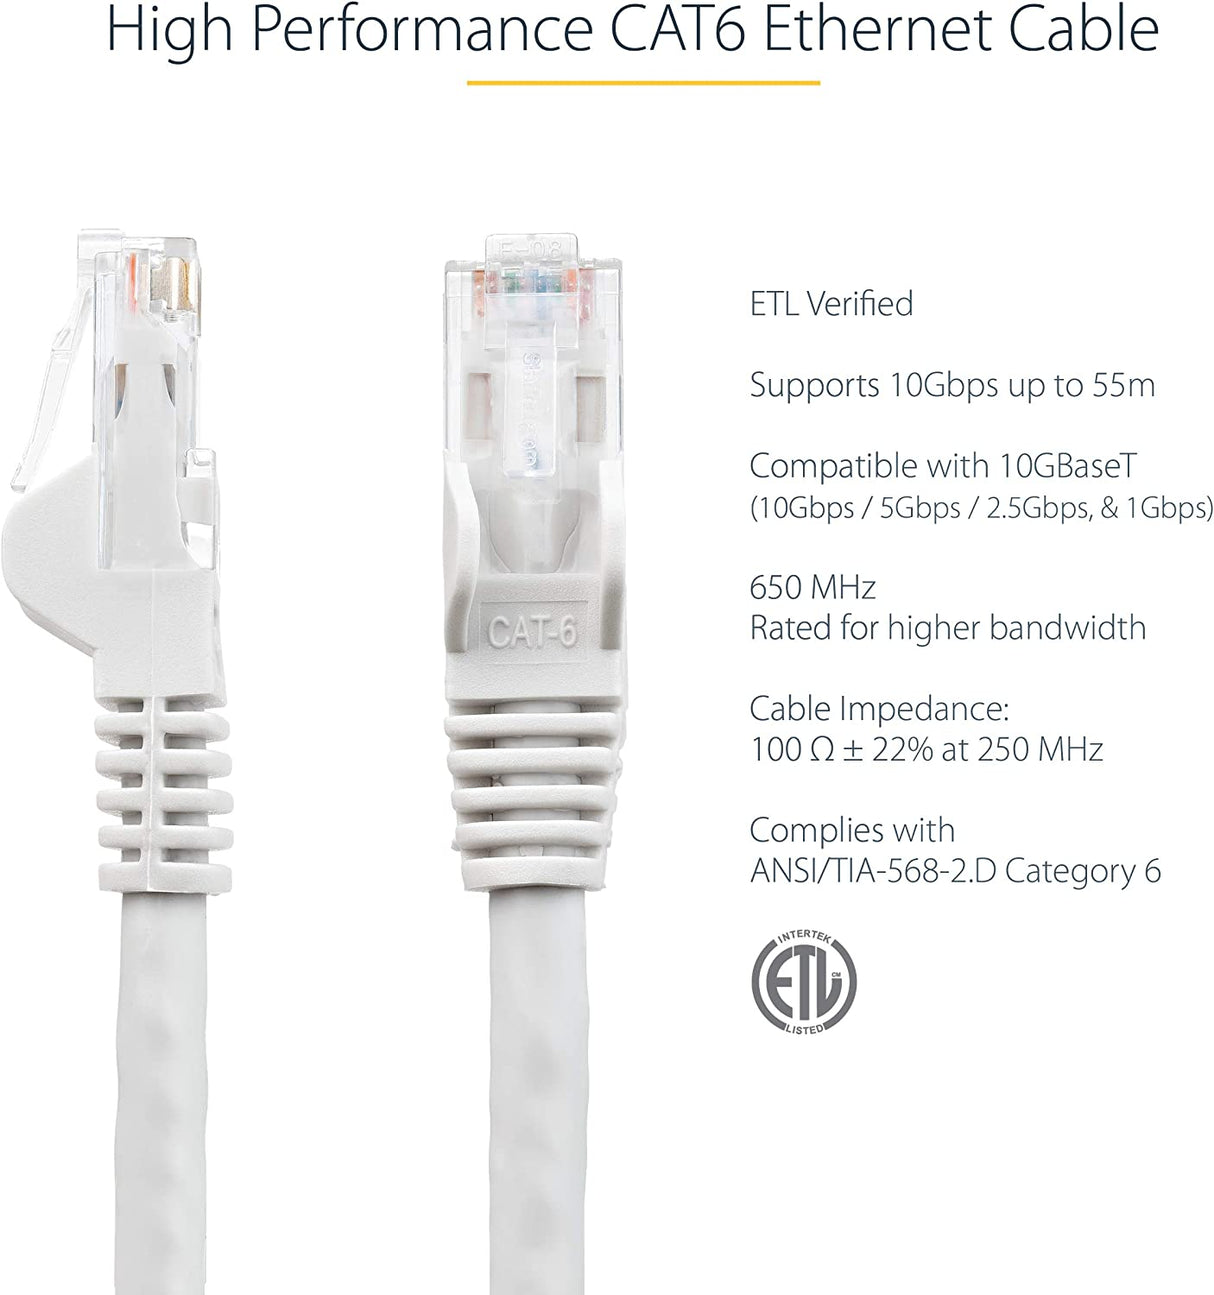 StarTech.com 75ft CAT6 Ethernet Cable - White CAT 6 Gigabit Ethernet Wire -650MHz 100W PoE RJ45 UTP Network/Patch Cord Snagless w/Strain Relief Fluke Tested/Wiring is UL Certified/TIA (N6PATCH75WH) White 75 ft / 22.8 m 1 Pack